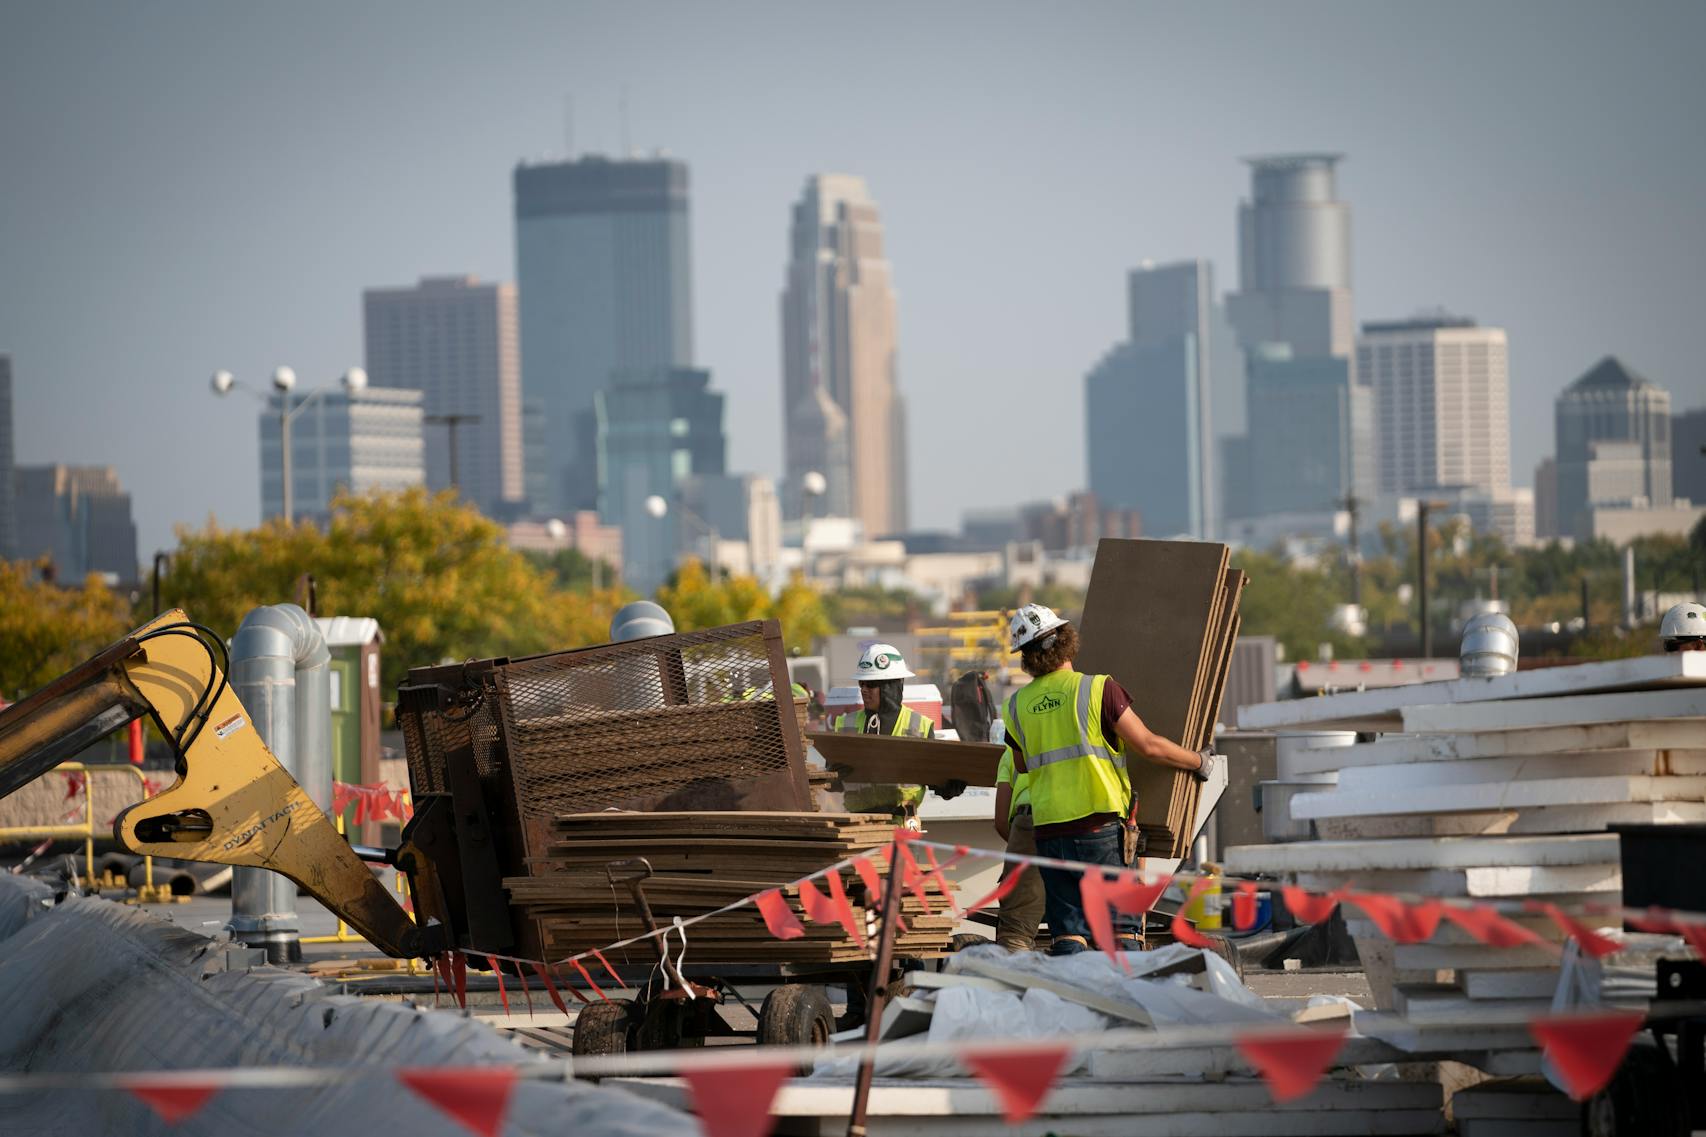 Construction workers worked on the roof of Highland Plaza that has a direct view of the Minneapolis skyline.